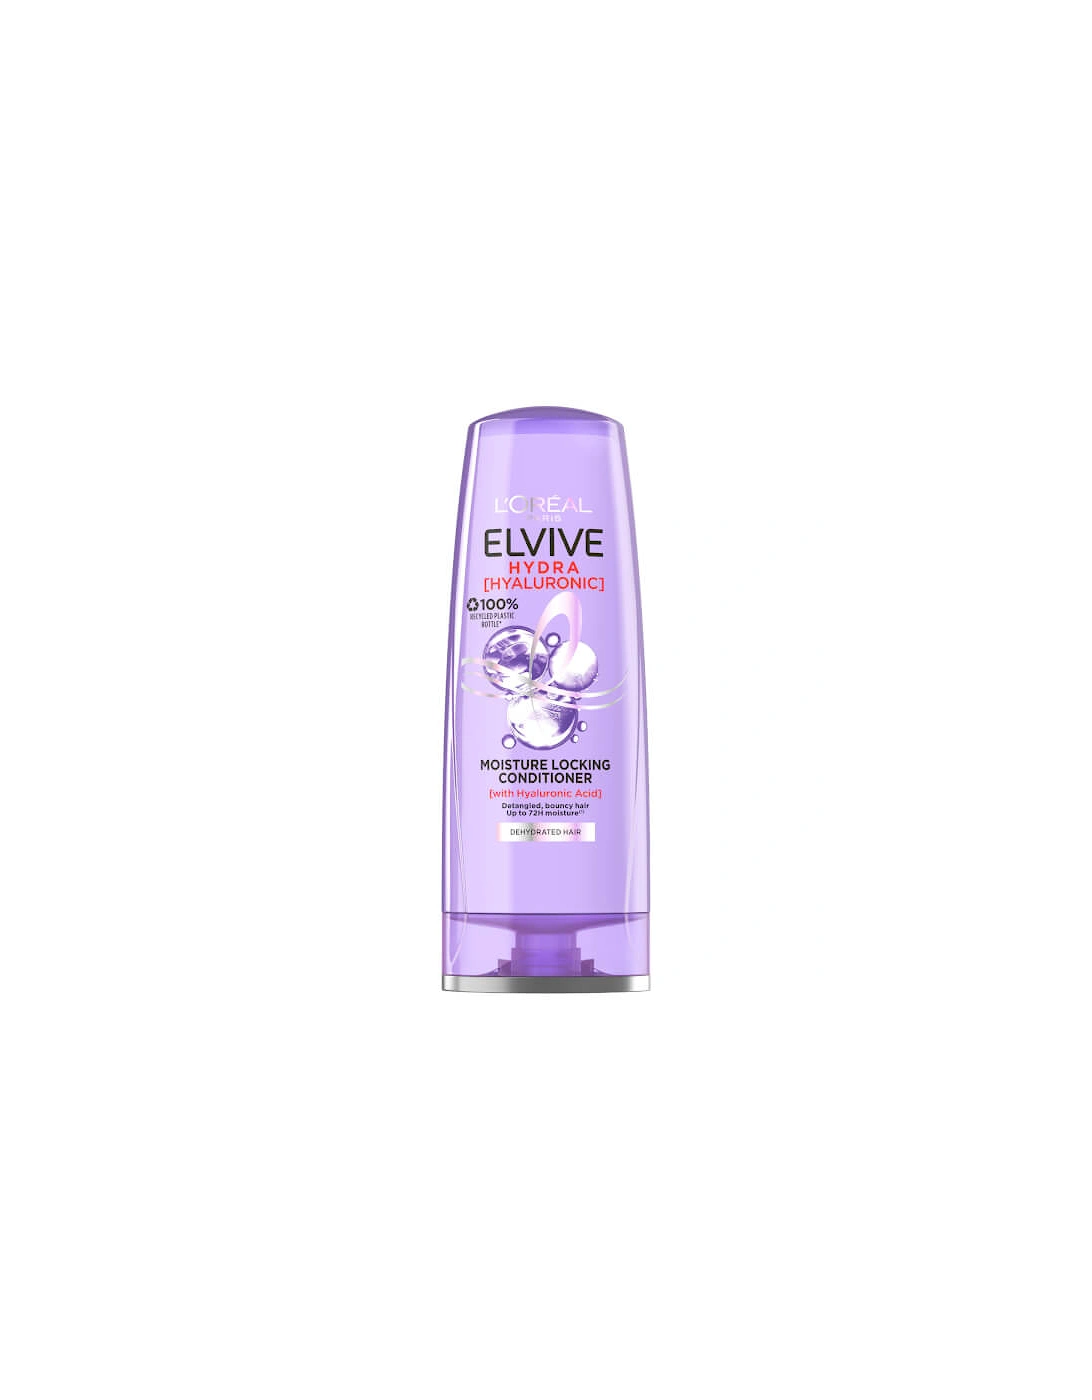 L'Oreal Elvive Hydra Hyaluronic Acid Conditioner - 250ml - PARIS, 2 of 1